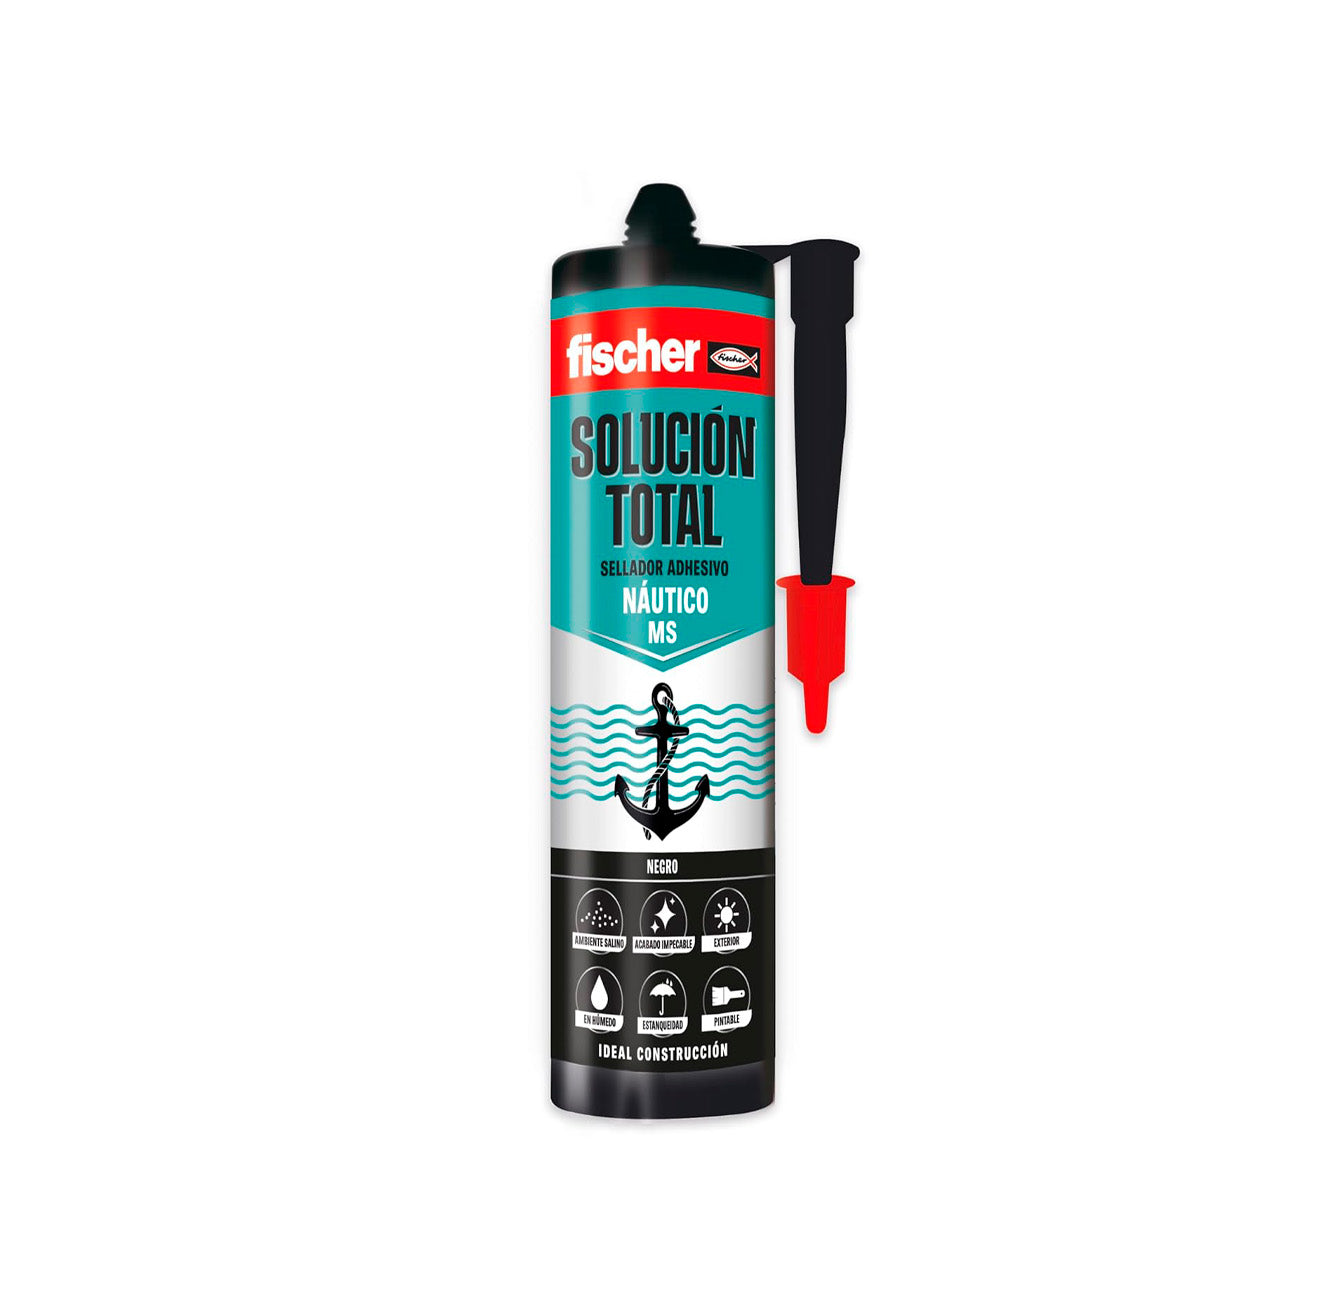 Fischer MS Nautical Special Adhesive Sealant Cartridge 290ml